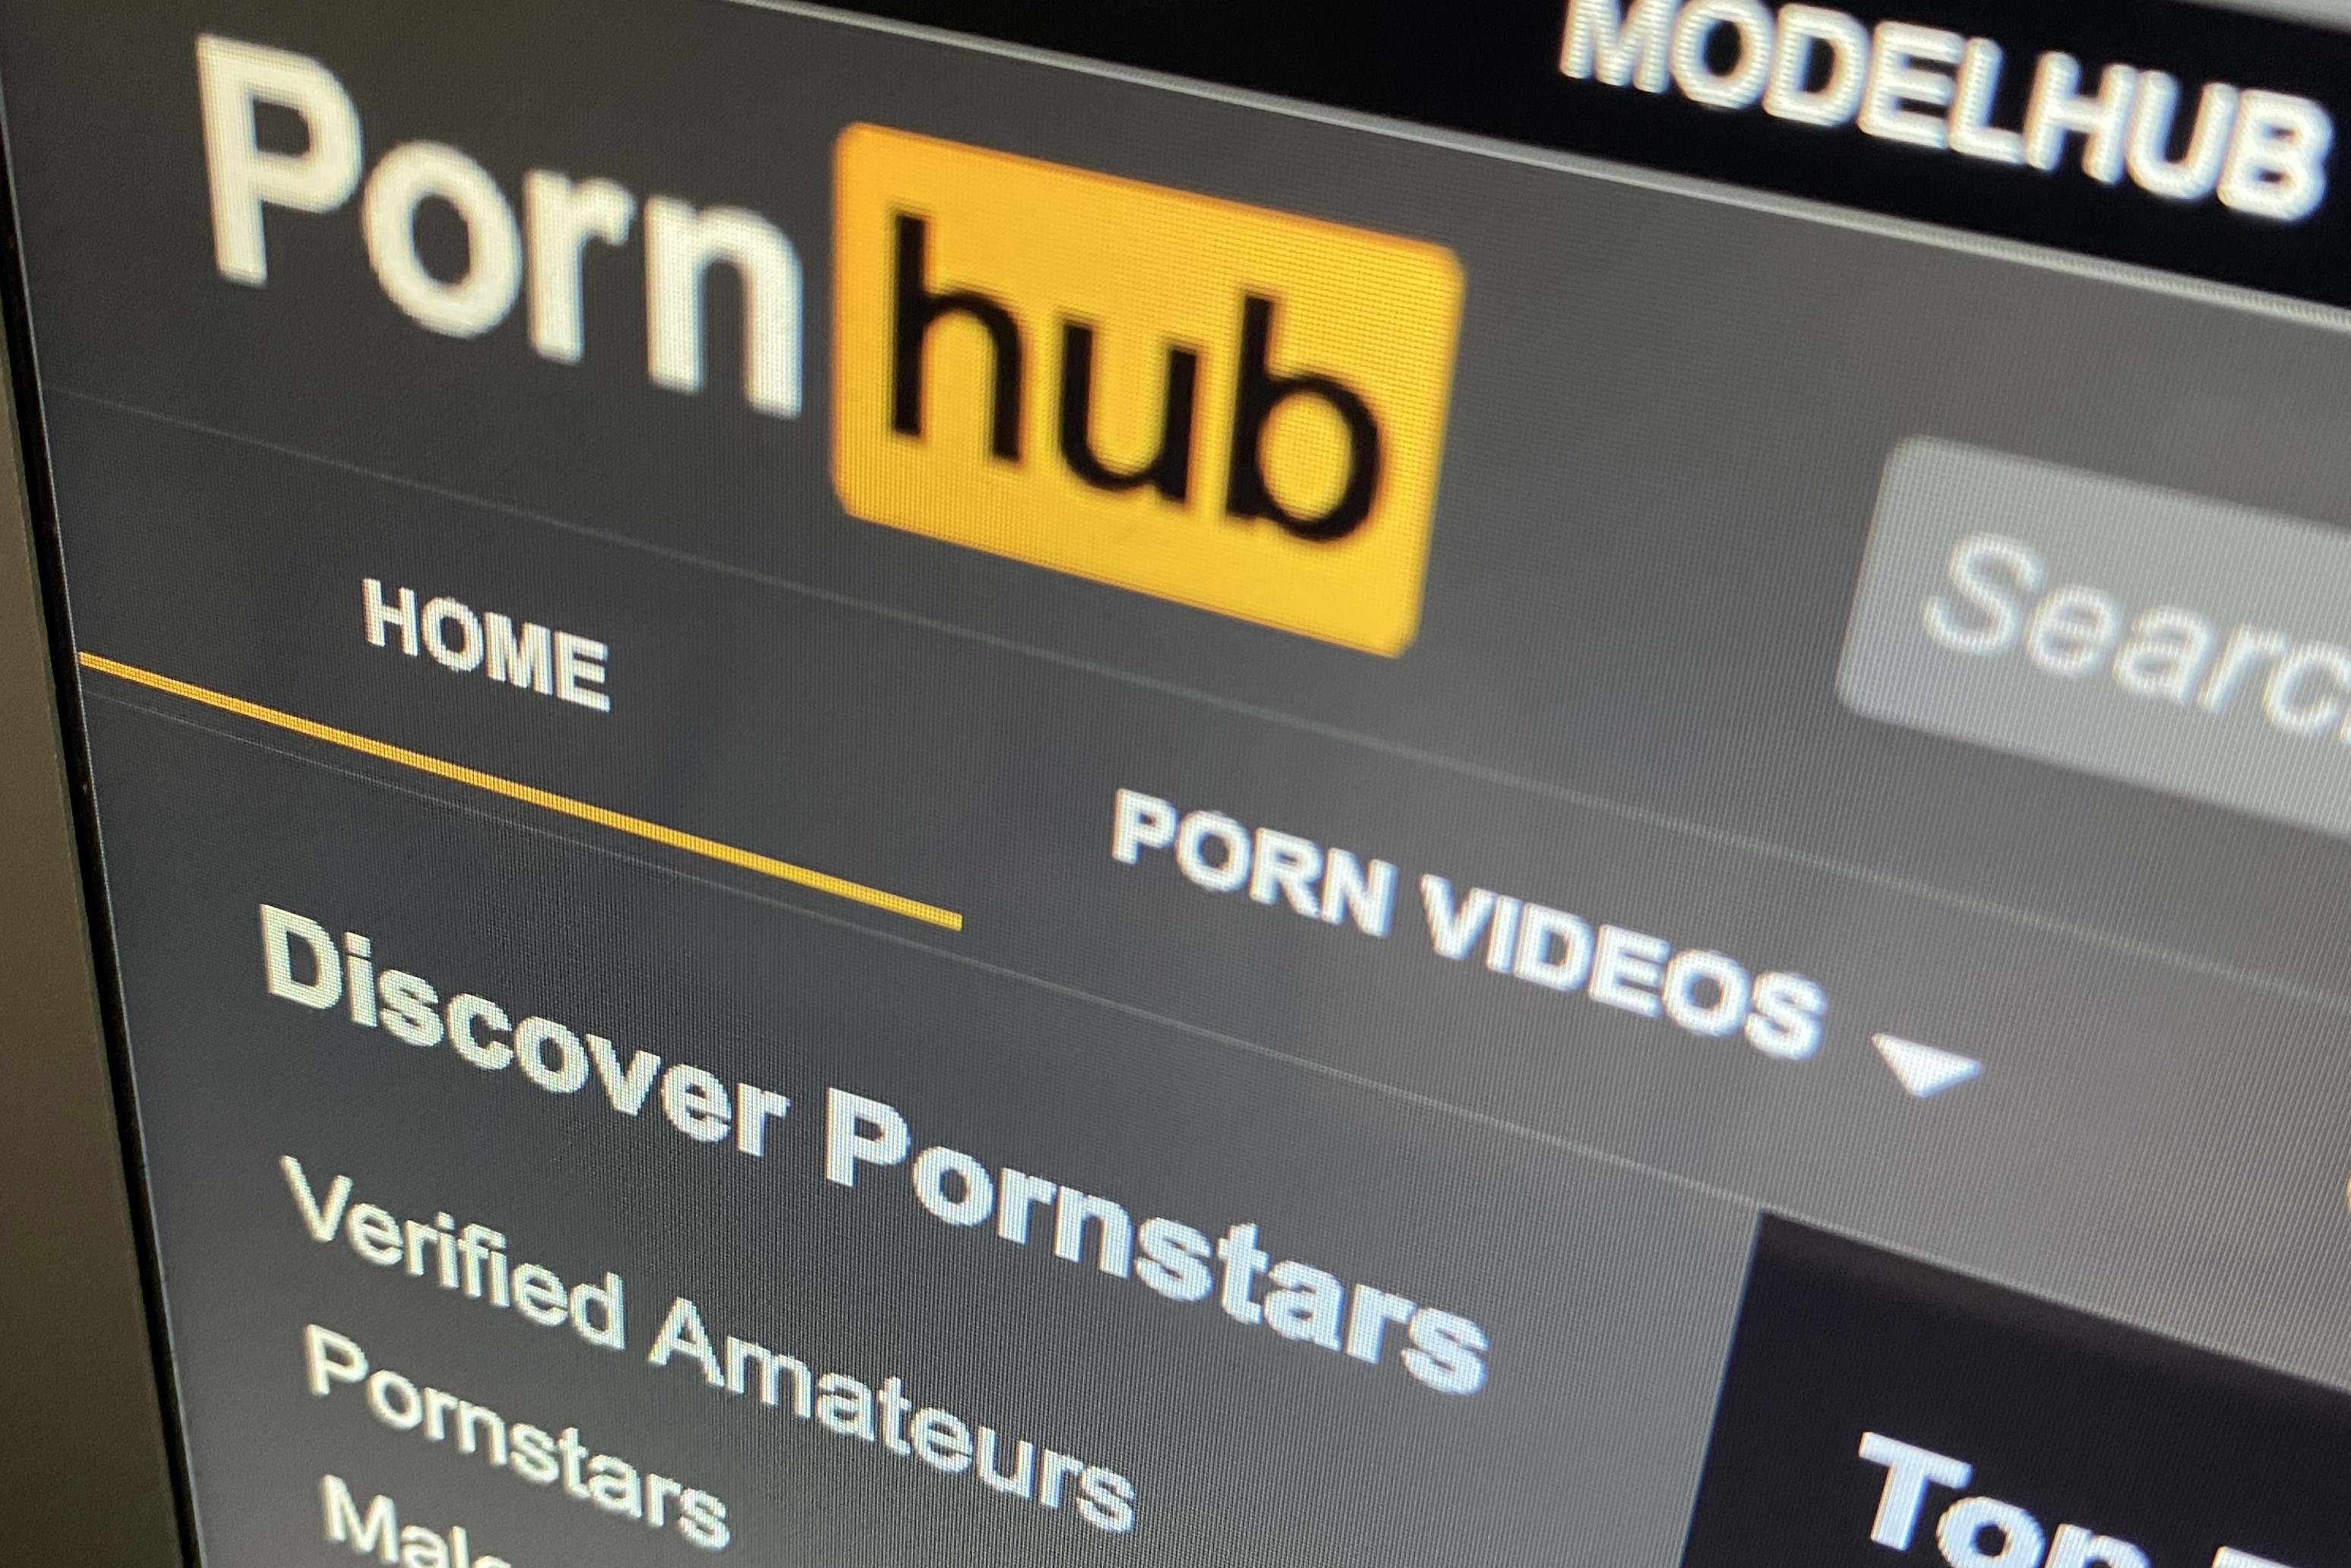 Home of porn videos in London